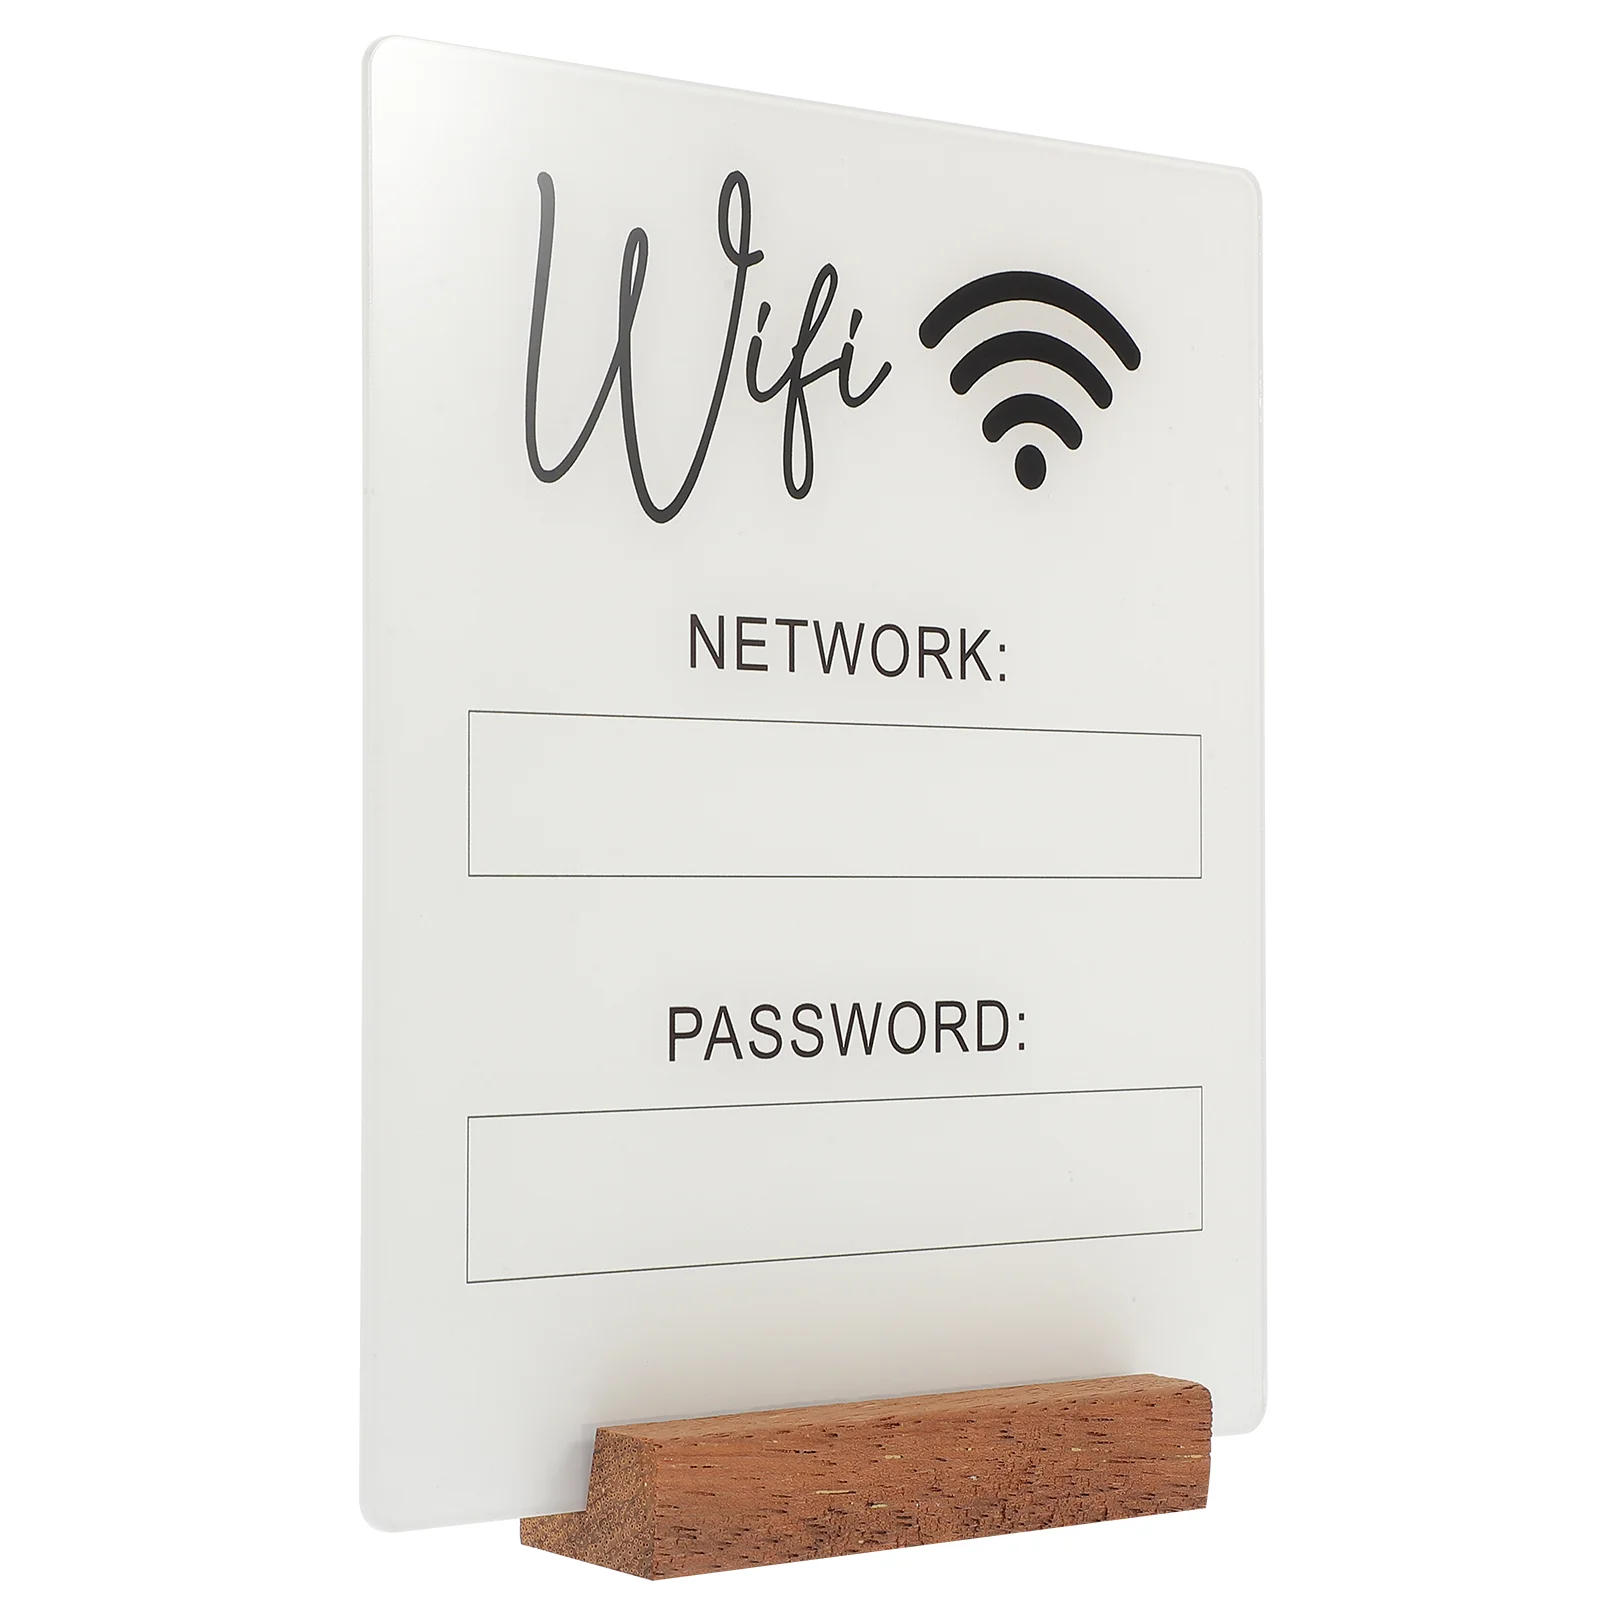 Wifi Password Sign Acrylic Reminder for Guest Room Desk Hotel Guests Stand Office Decor 2021 japan anime jujutsu kaisen acrylic figure stand model plate desk decor cosplay xmas keychain standing sign fans gifts